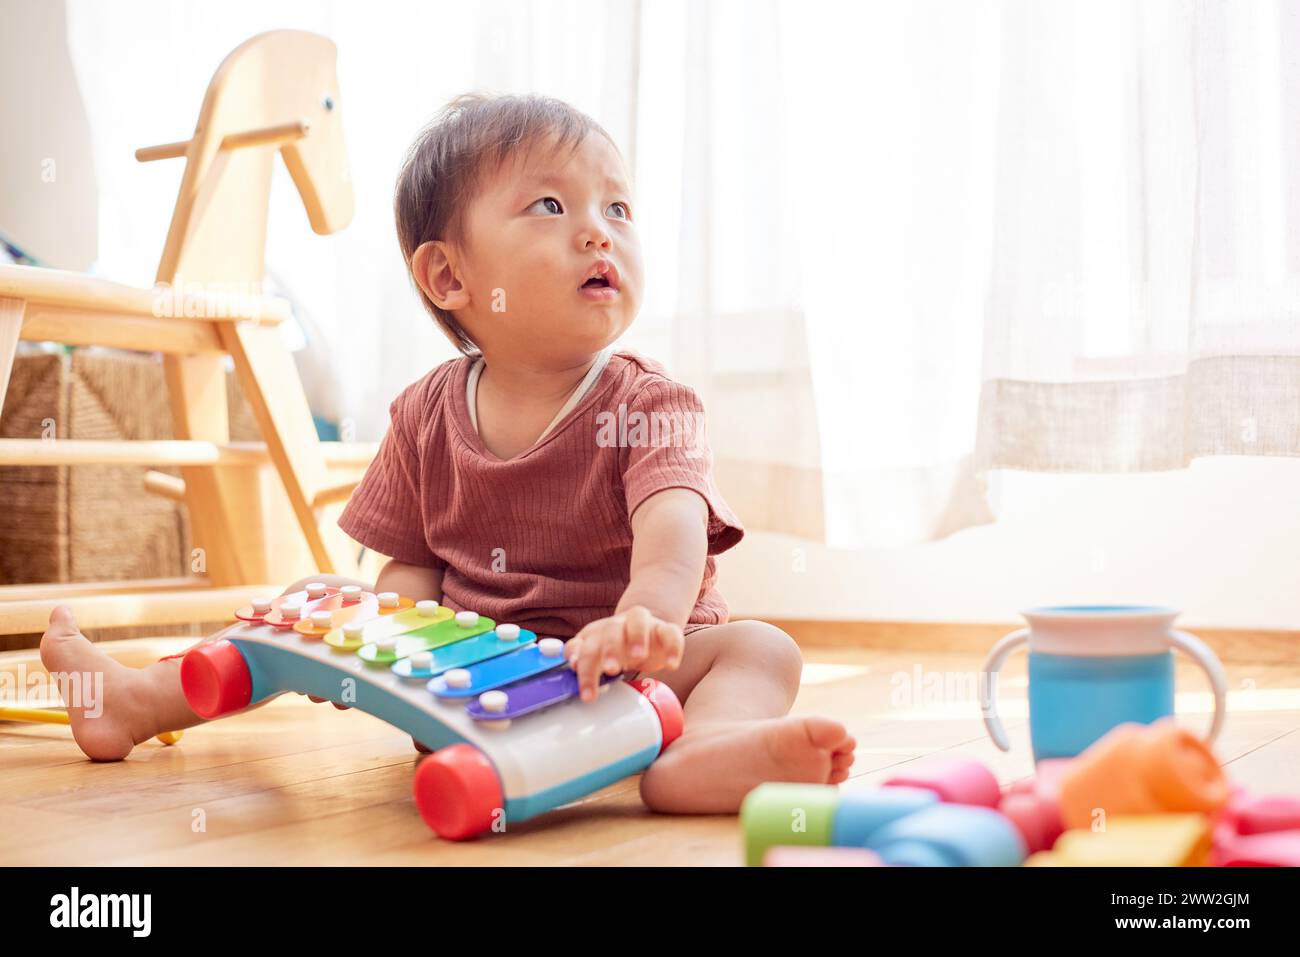 A baby playing with toys on the floor Stock Photo